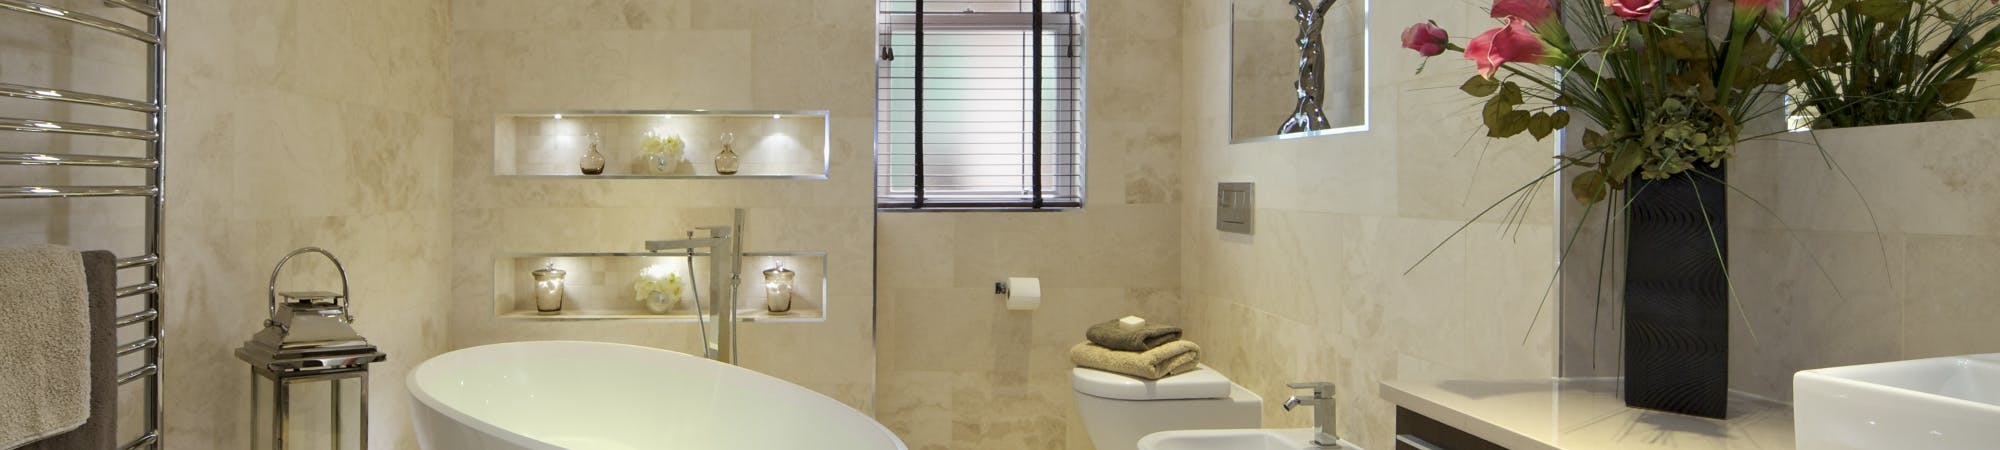 More Bathrooms | Part Of The Passmore Group